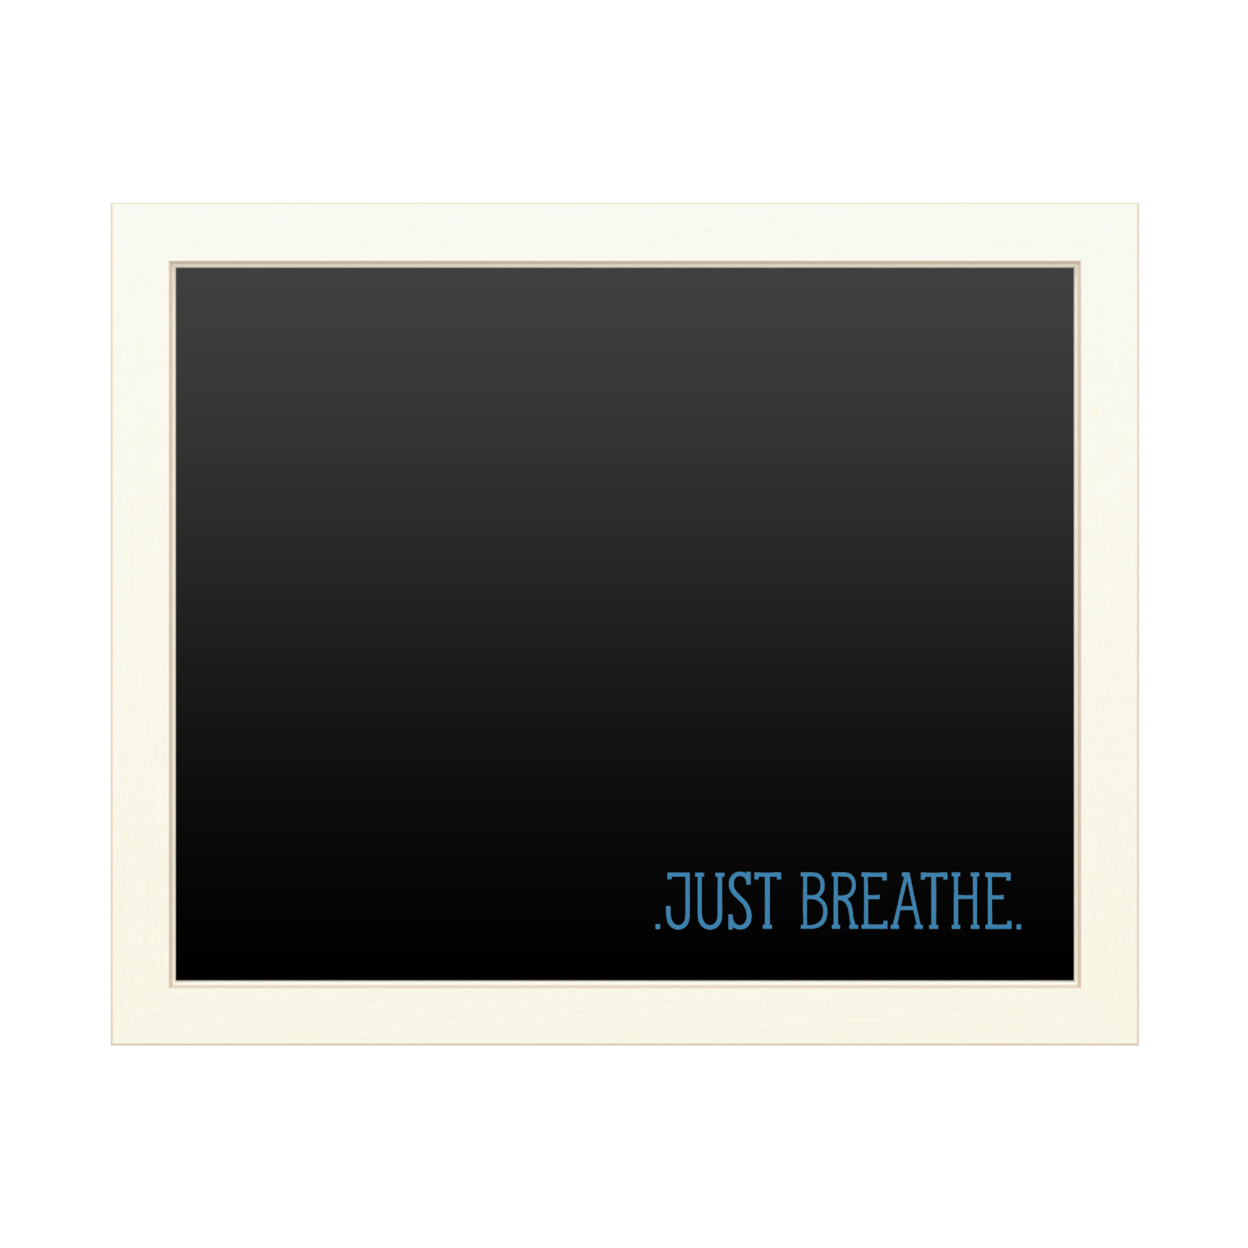 16 X 20 Chalk Board With Printed Artwork - Just Breathe 2 White Board - Ready To Hang Chalkboard